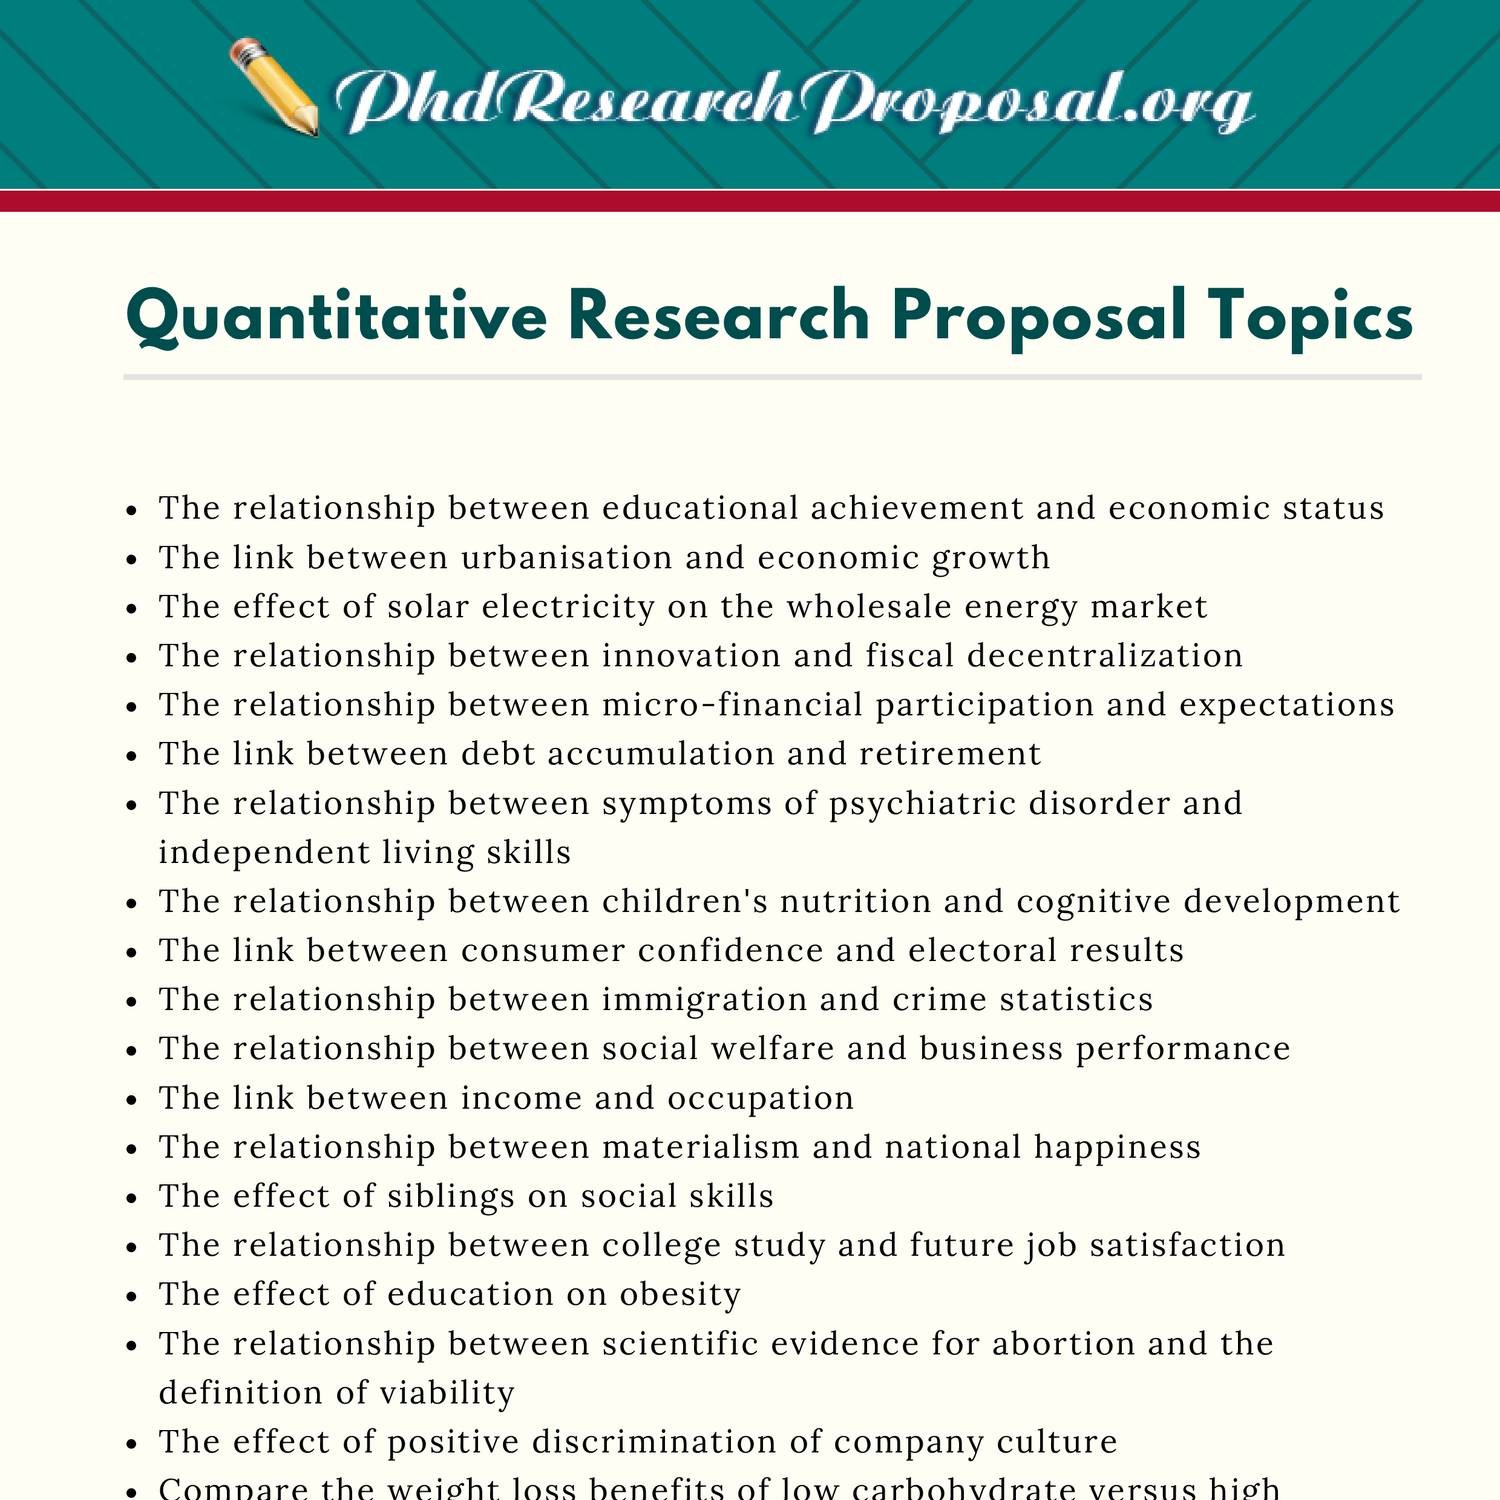 sample research proposal on education topics